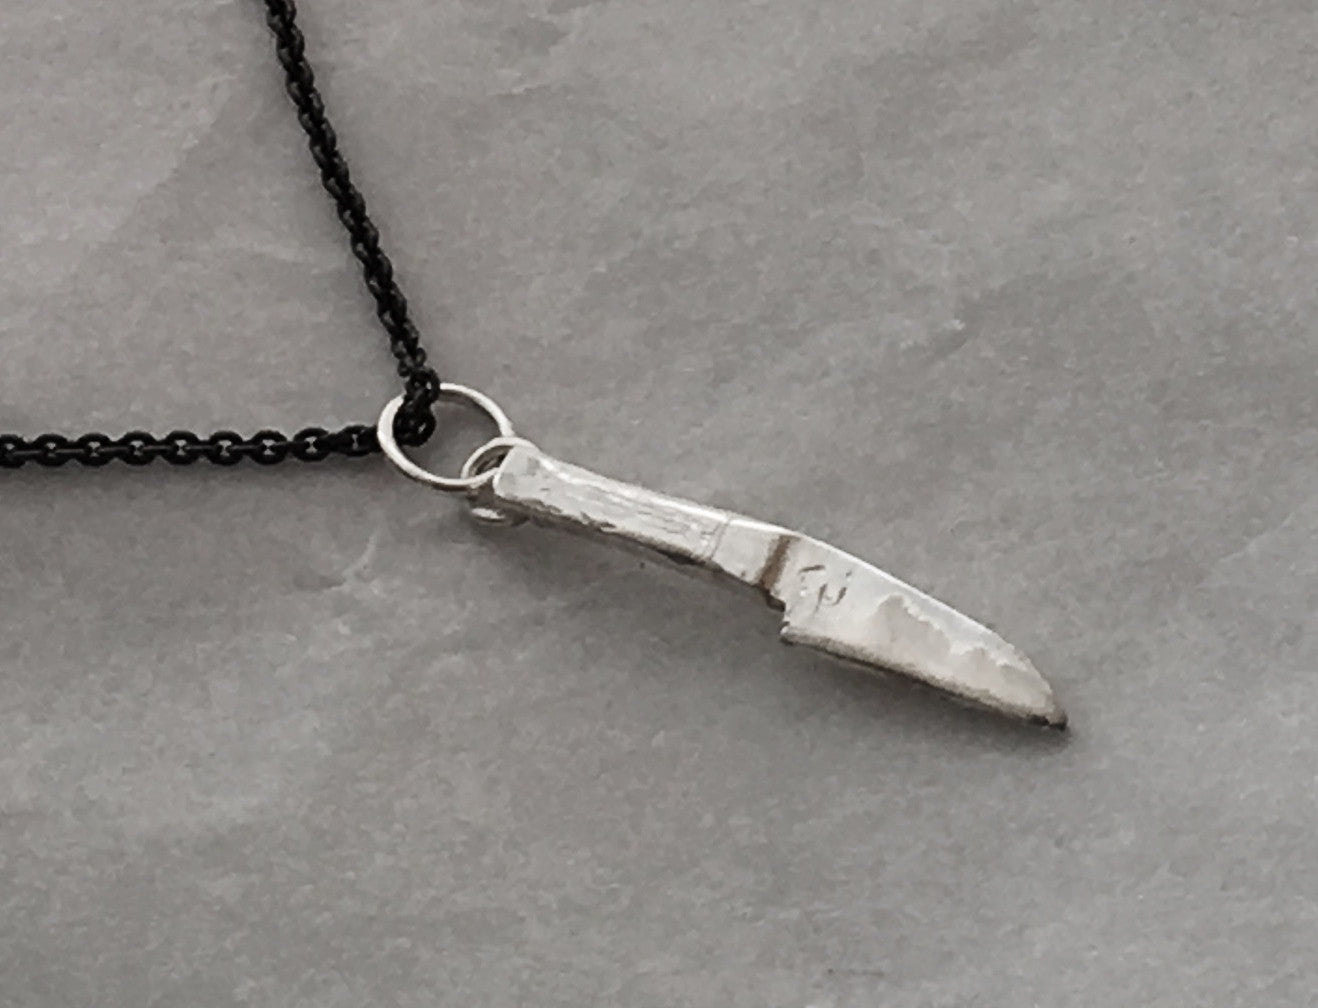 Japanese Sushi Knife Necklace in Sterling Silver with Black Silver Chain